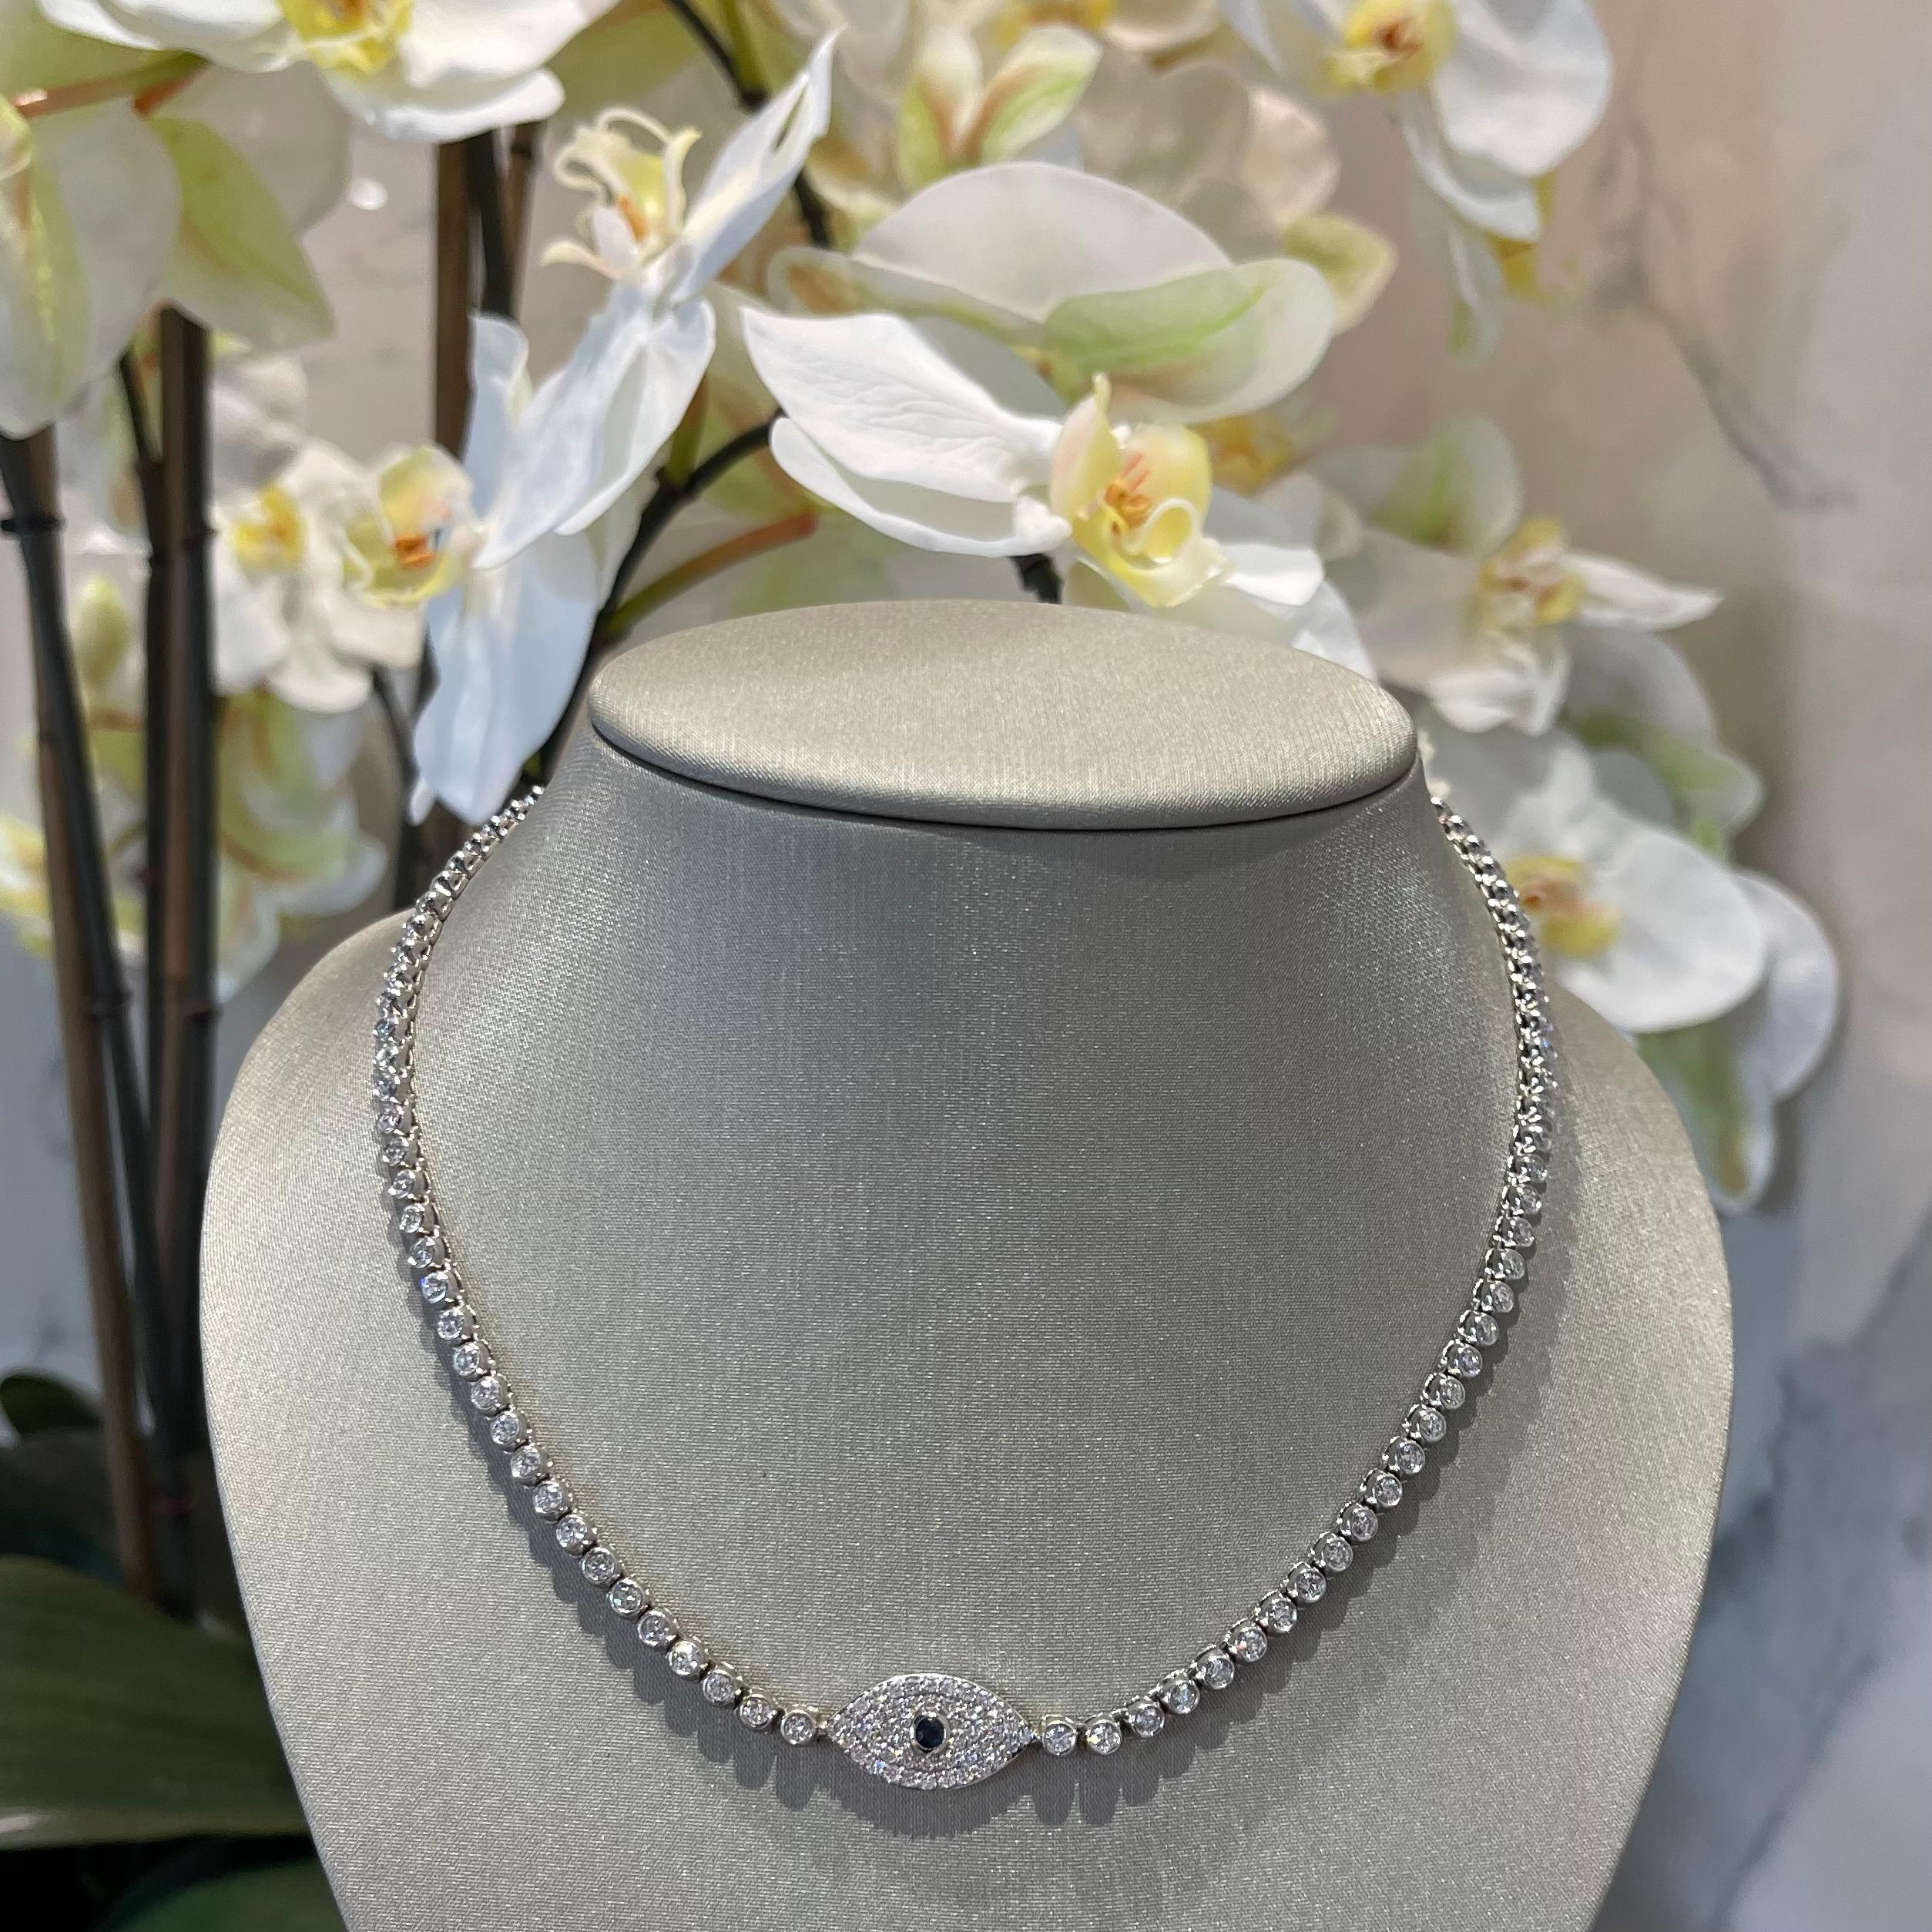 Style: Diamond Evil Eye Necklace
Metal: White  Gold 

Metal Purity: 14K
Stones: Diamonds​​​​​​​ and Sapphire

Diamond Clarity: VSI

Total Carat Weight: 7.6 ct 

Necklace Length: 15 in 

Total Weight: 27.4 g

Includes: 24 Month Brilliance Jewels